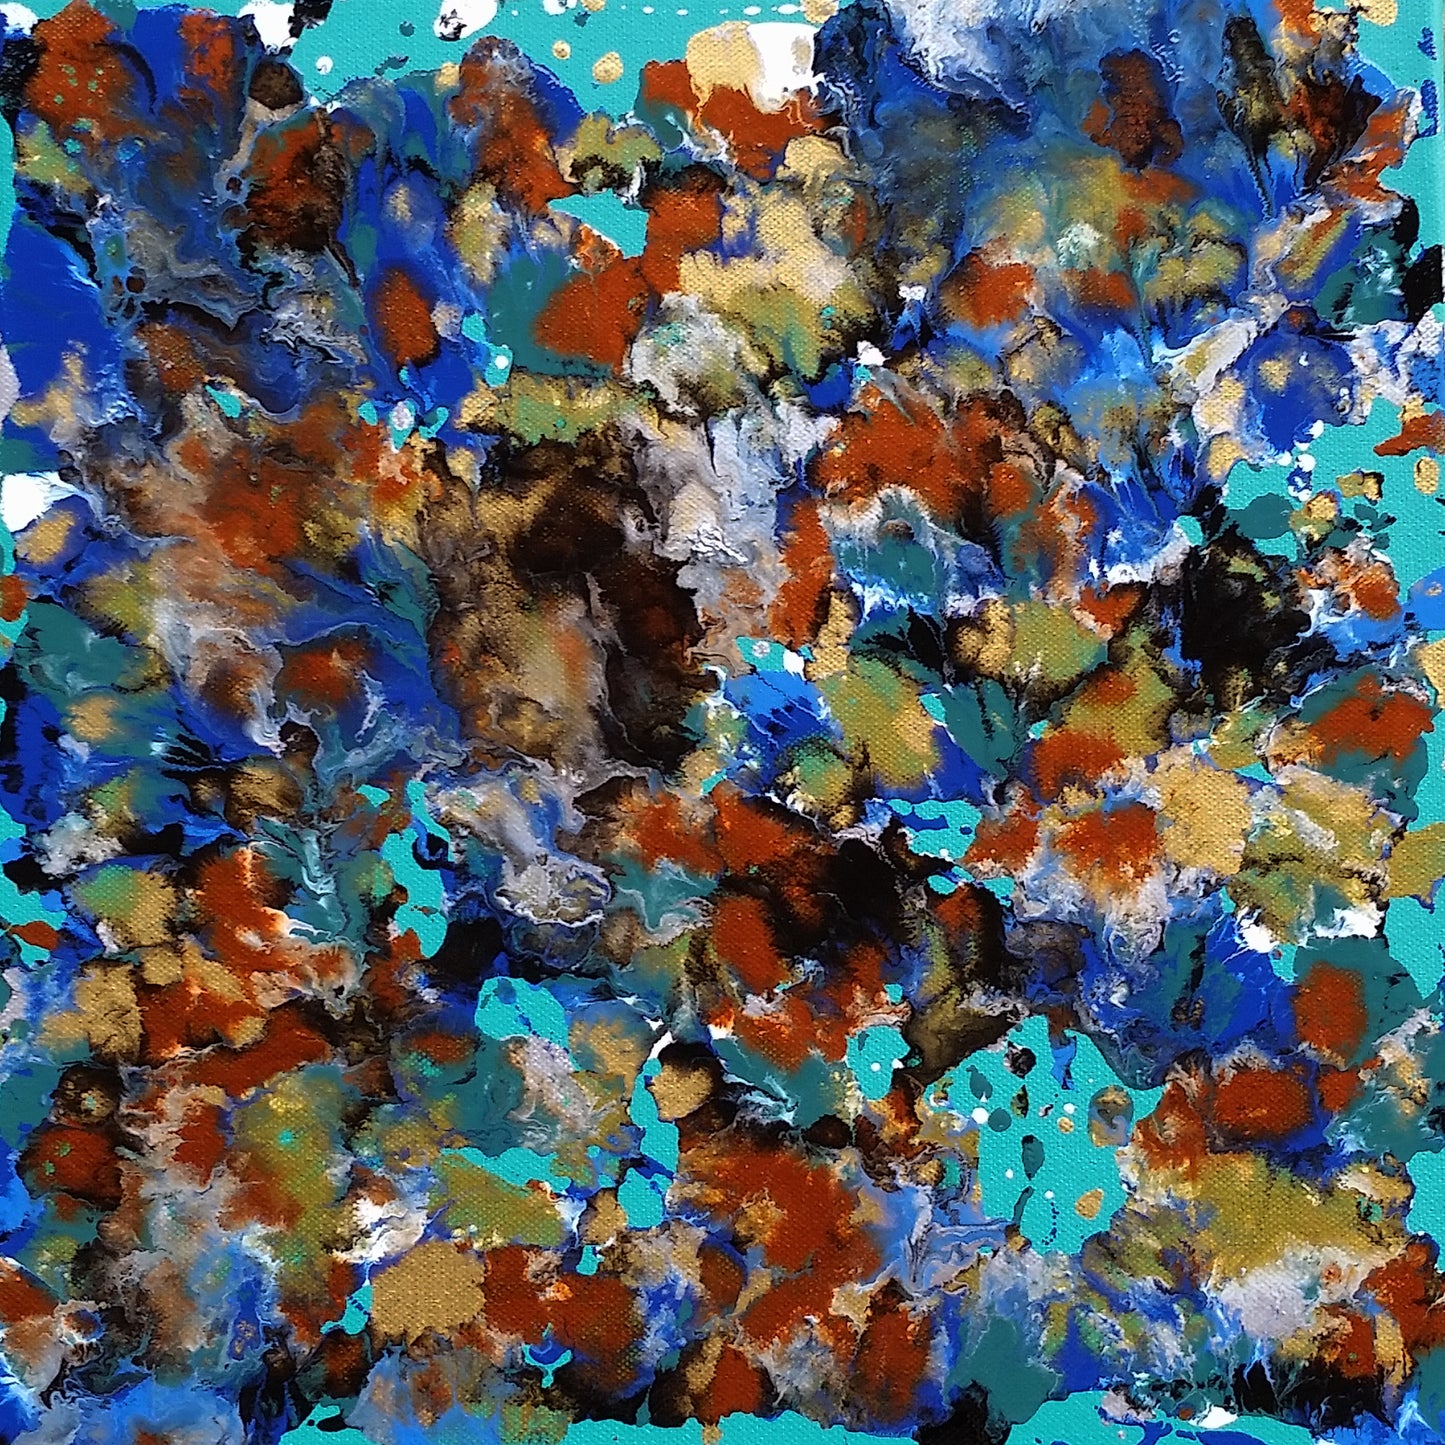 Fluid-Ocean-by-Alexandra-Romano-Original-Artworks Abstract-Expressionism-Paintings-for-Sale-Turquoise-Colorful-Toronto-Canada-Art Gallery